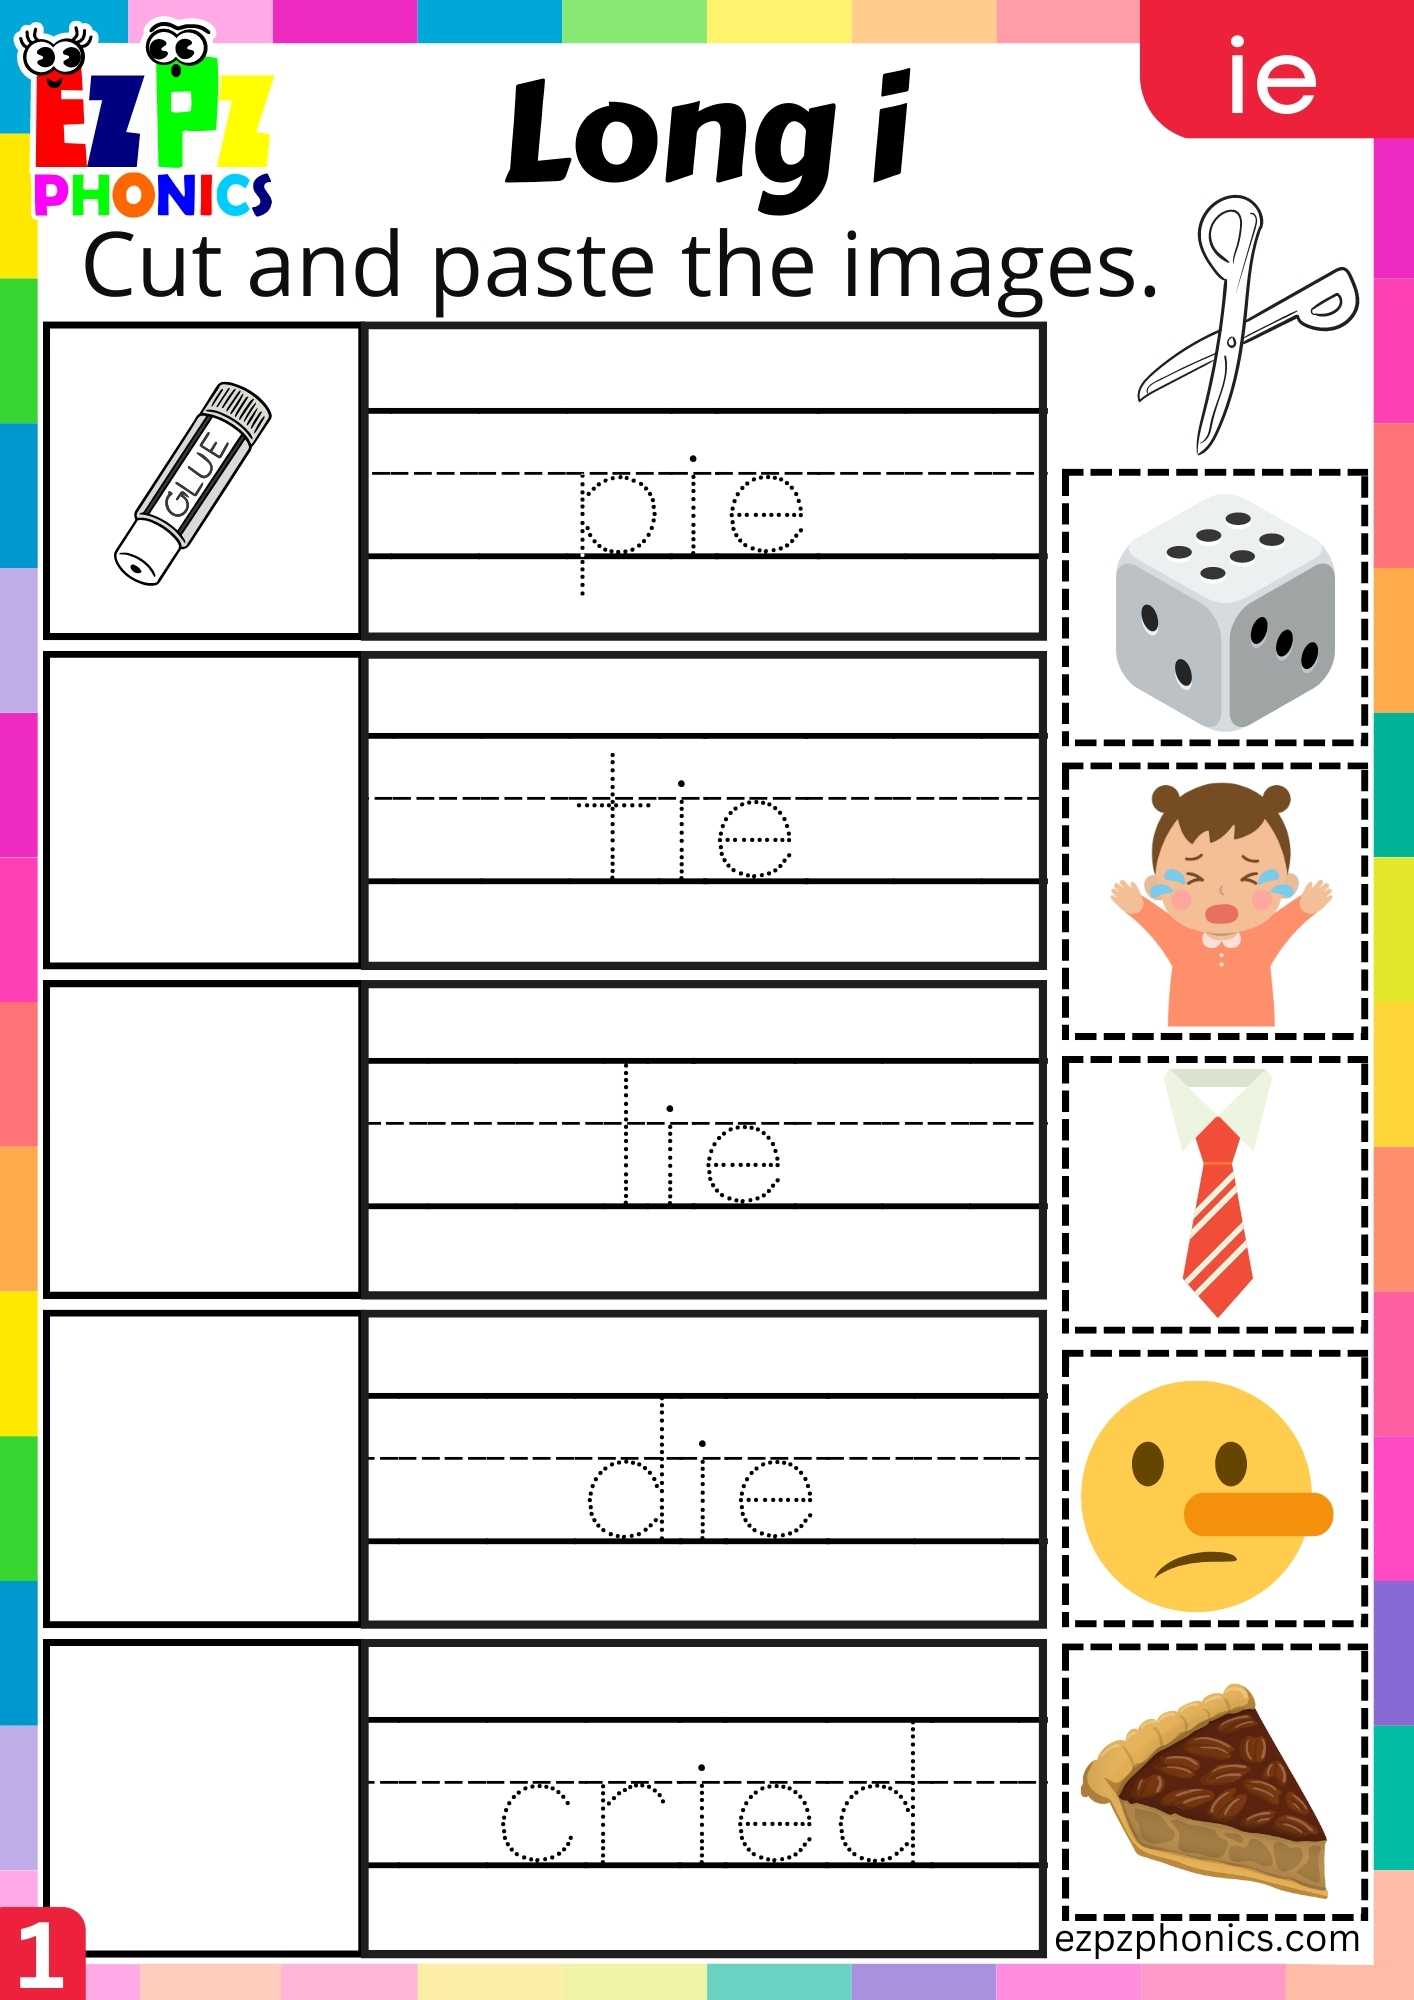 IE Words Cut And Paste The Images Long I Phonics Worksheet ...